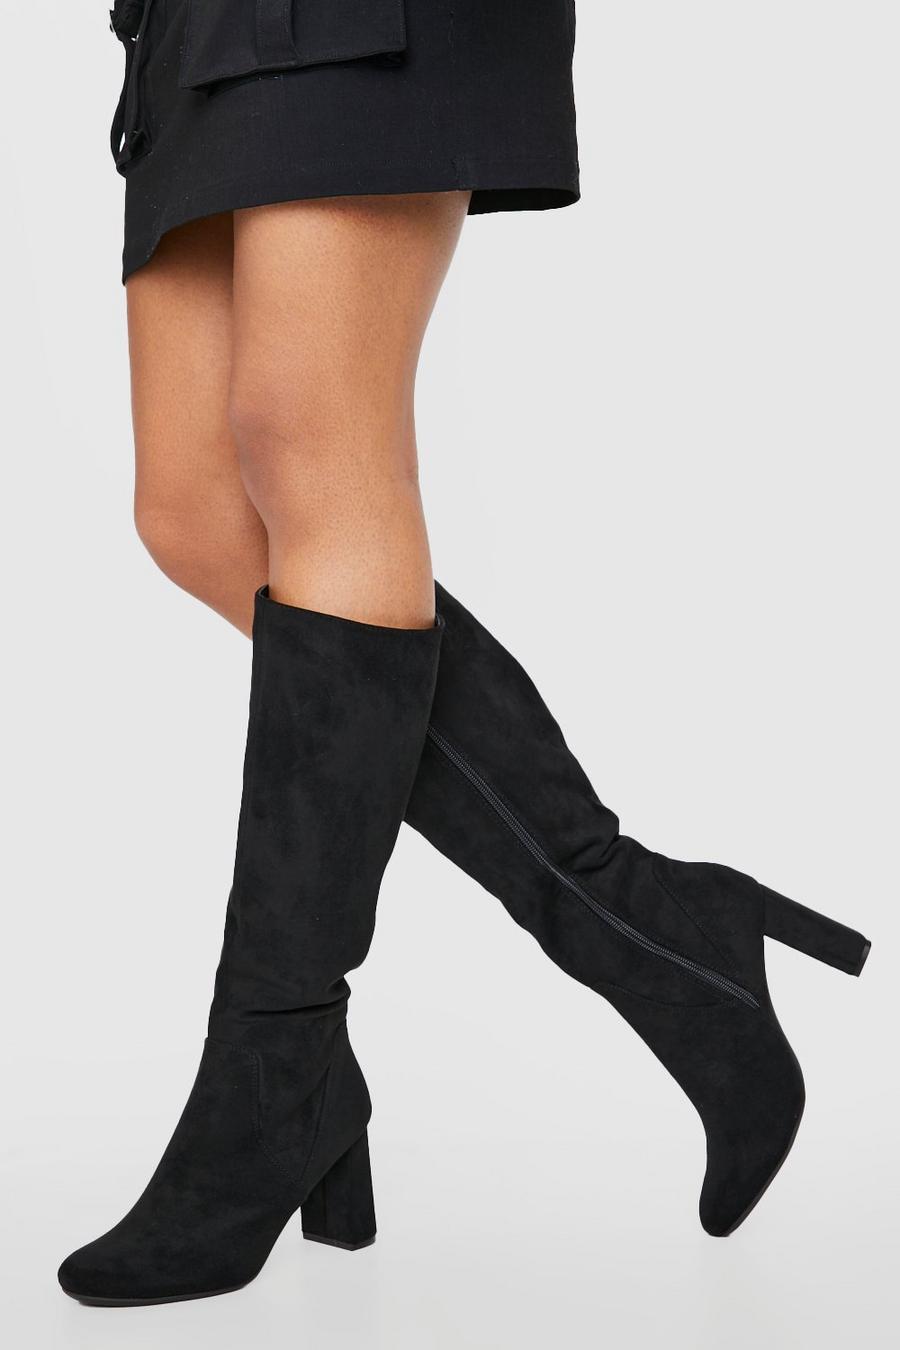 Black noir Faux Suede Knee High Heeled Boots